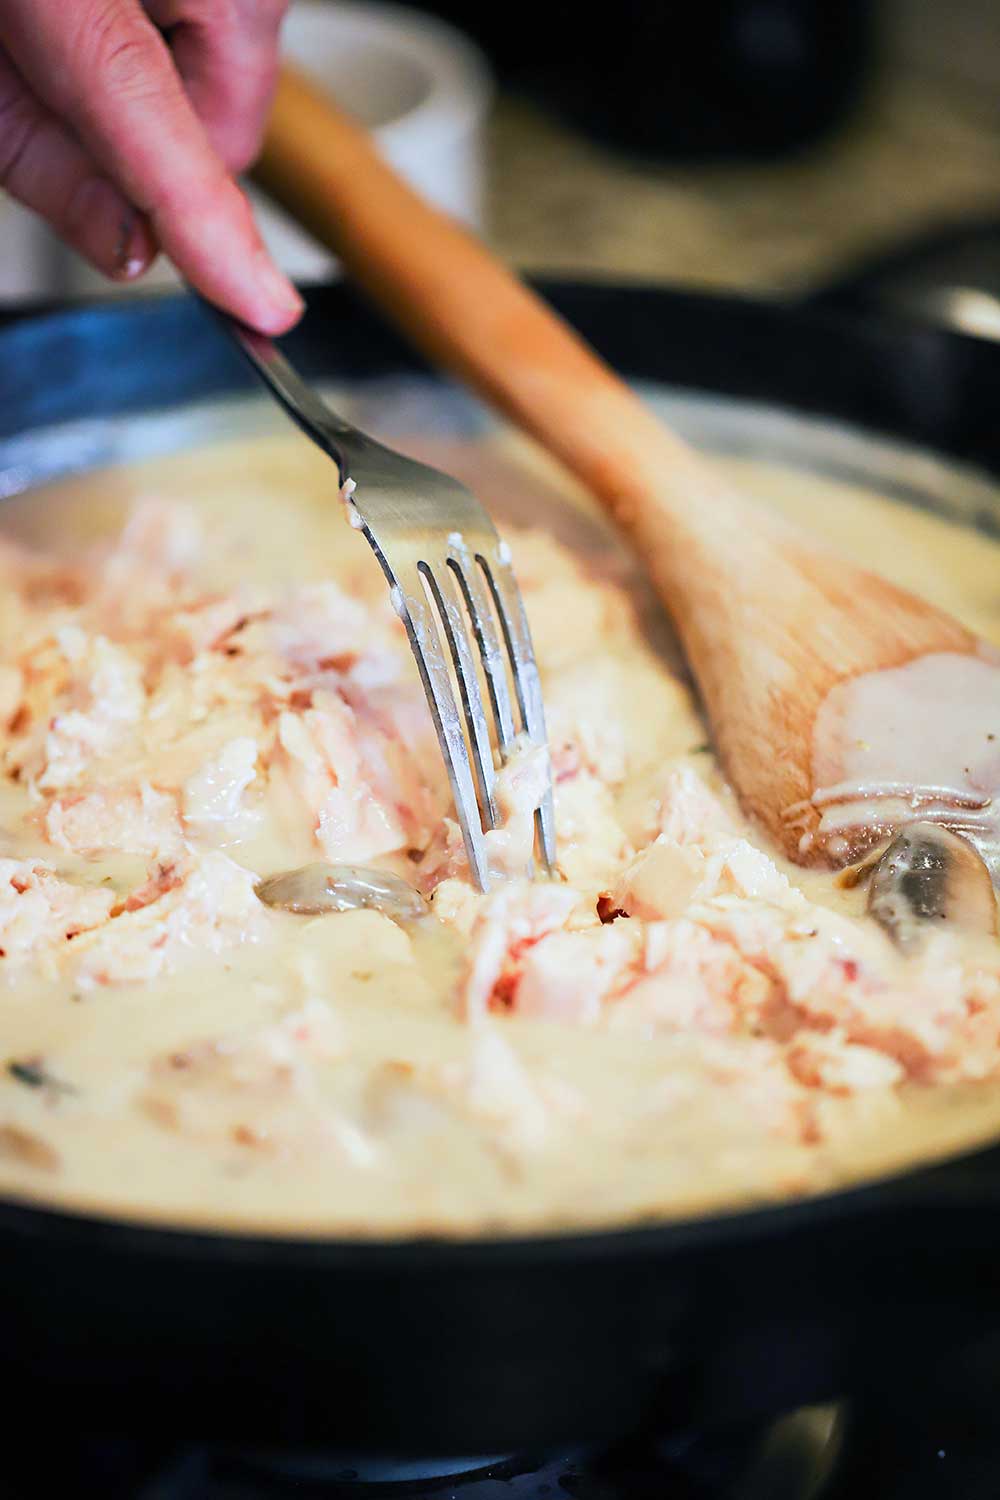 A person's hand using a fork to flake canned tuna into a cast-iron skillet filled with homemade cream of mushroom soup. 